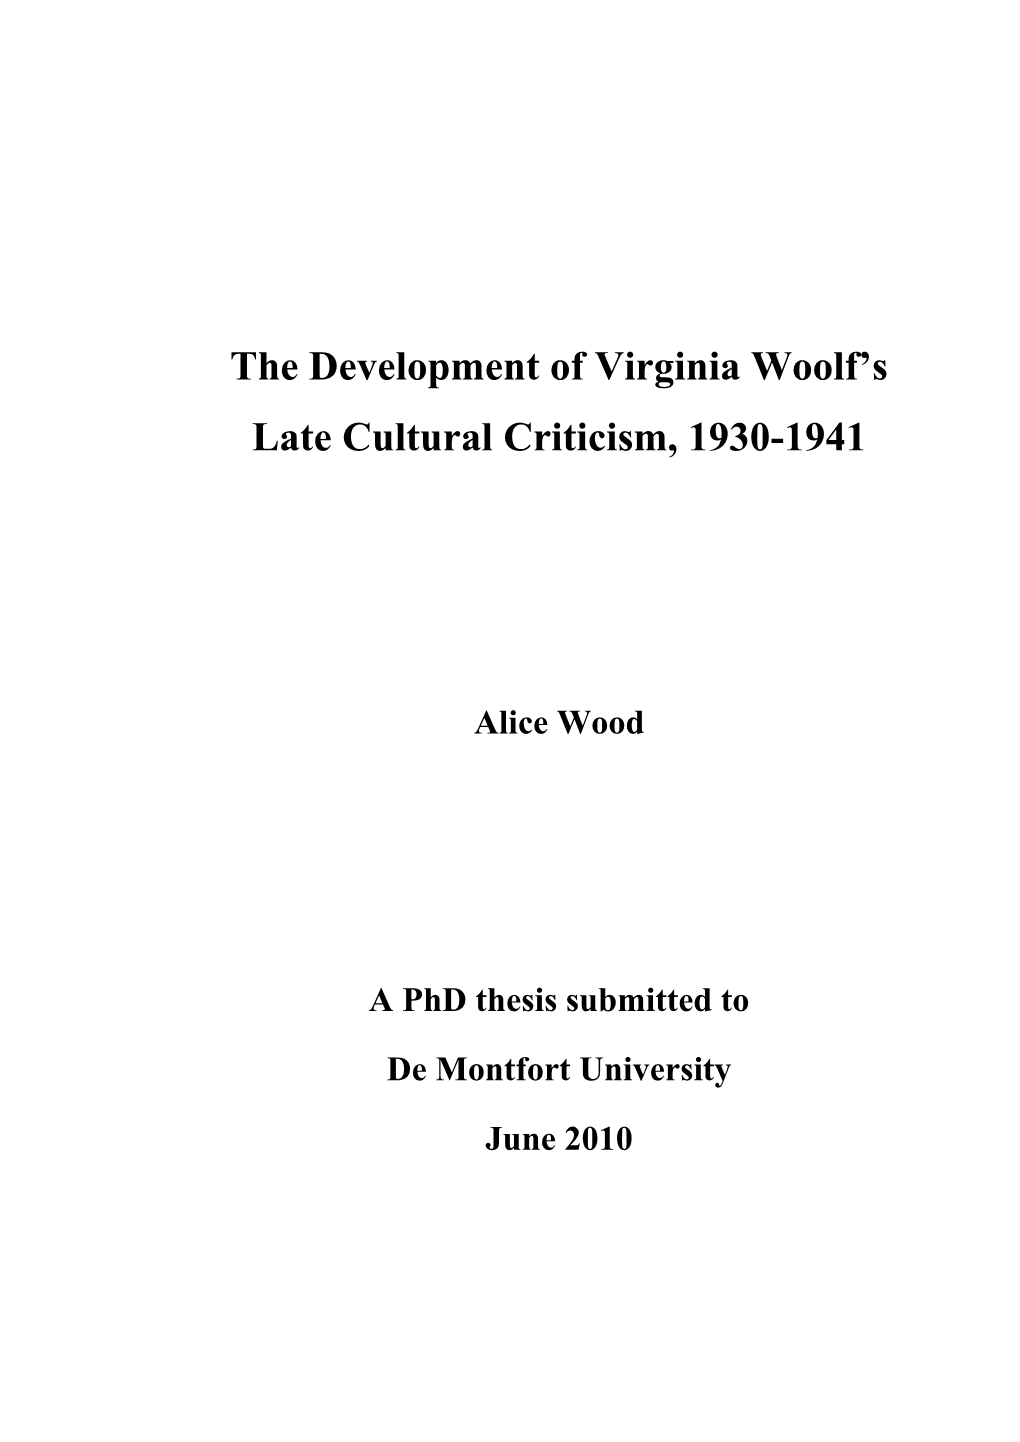 The Development of Virginia Woolf's Late Cultural Criticism, 1930-1941